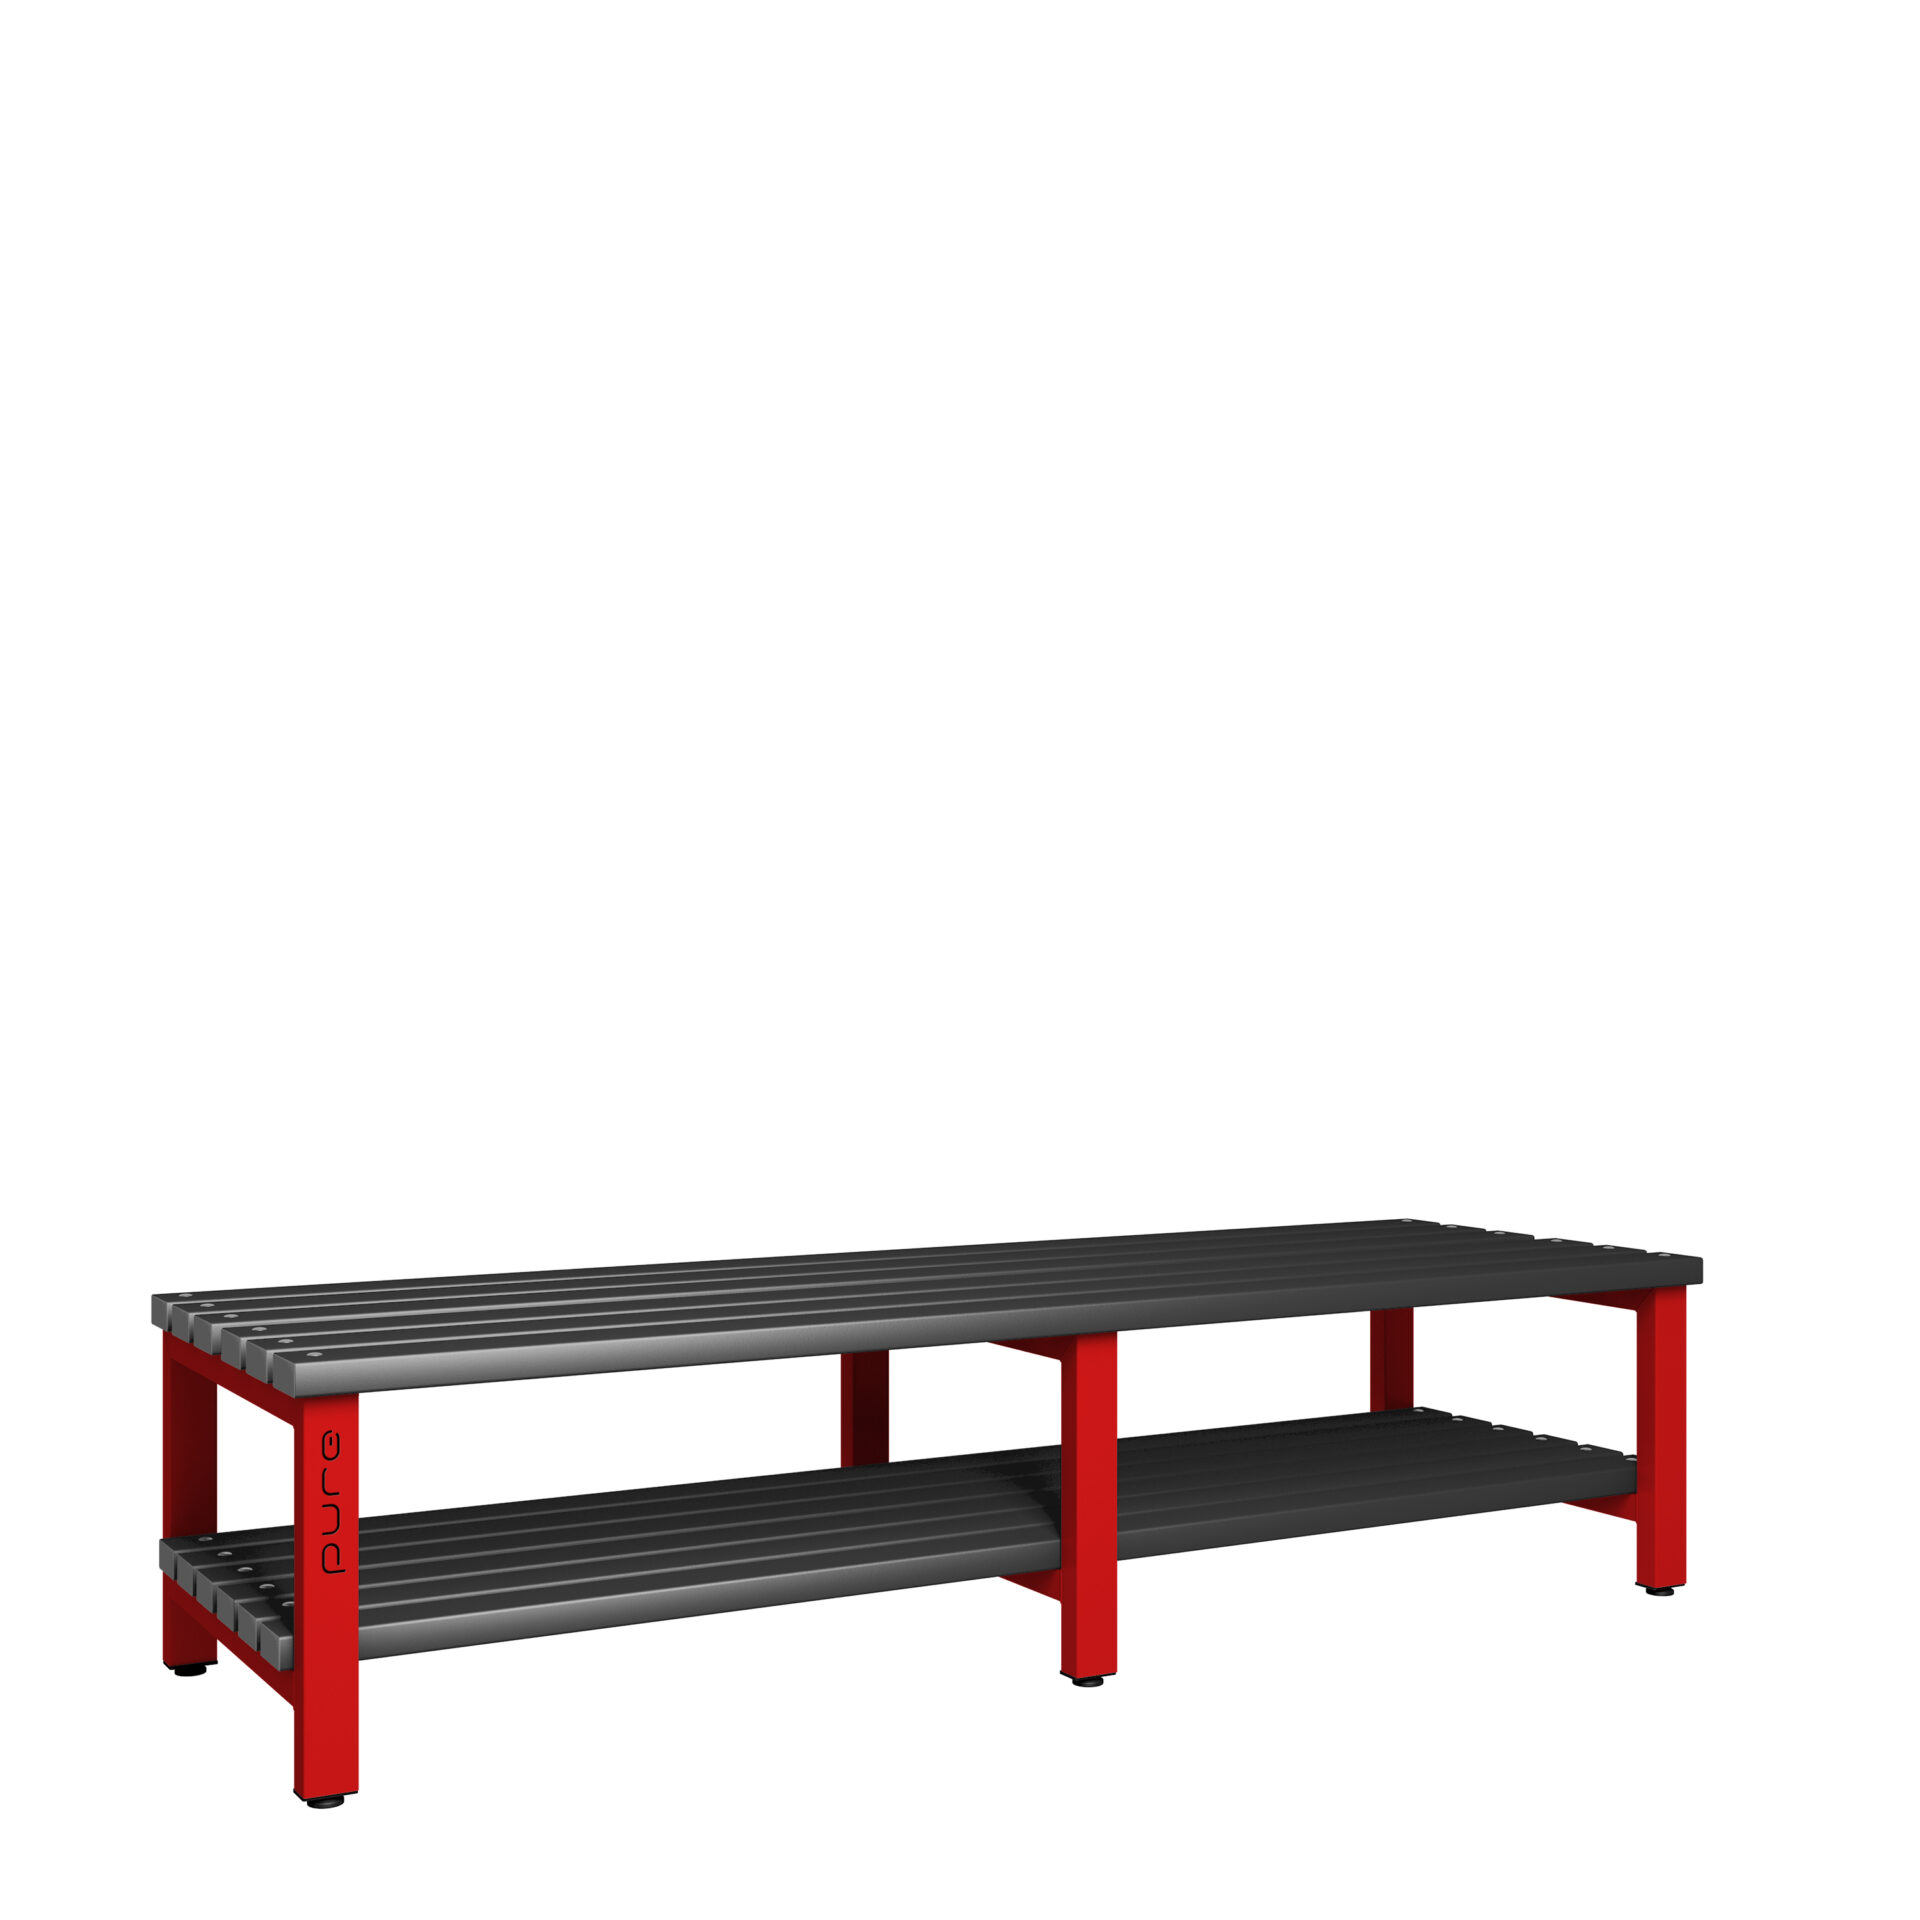 Pure Carbon Zero Double Sided 2000mm Standard Bench With Shoe Shelf